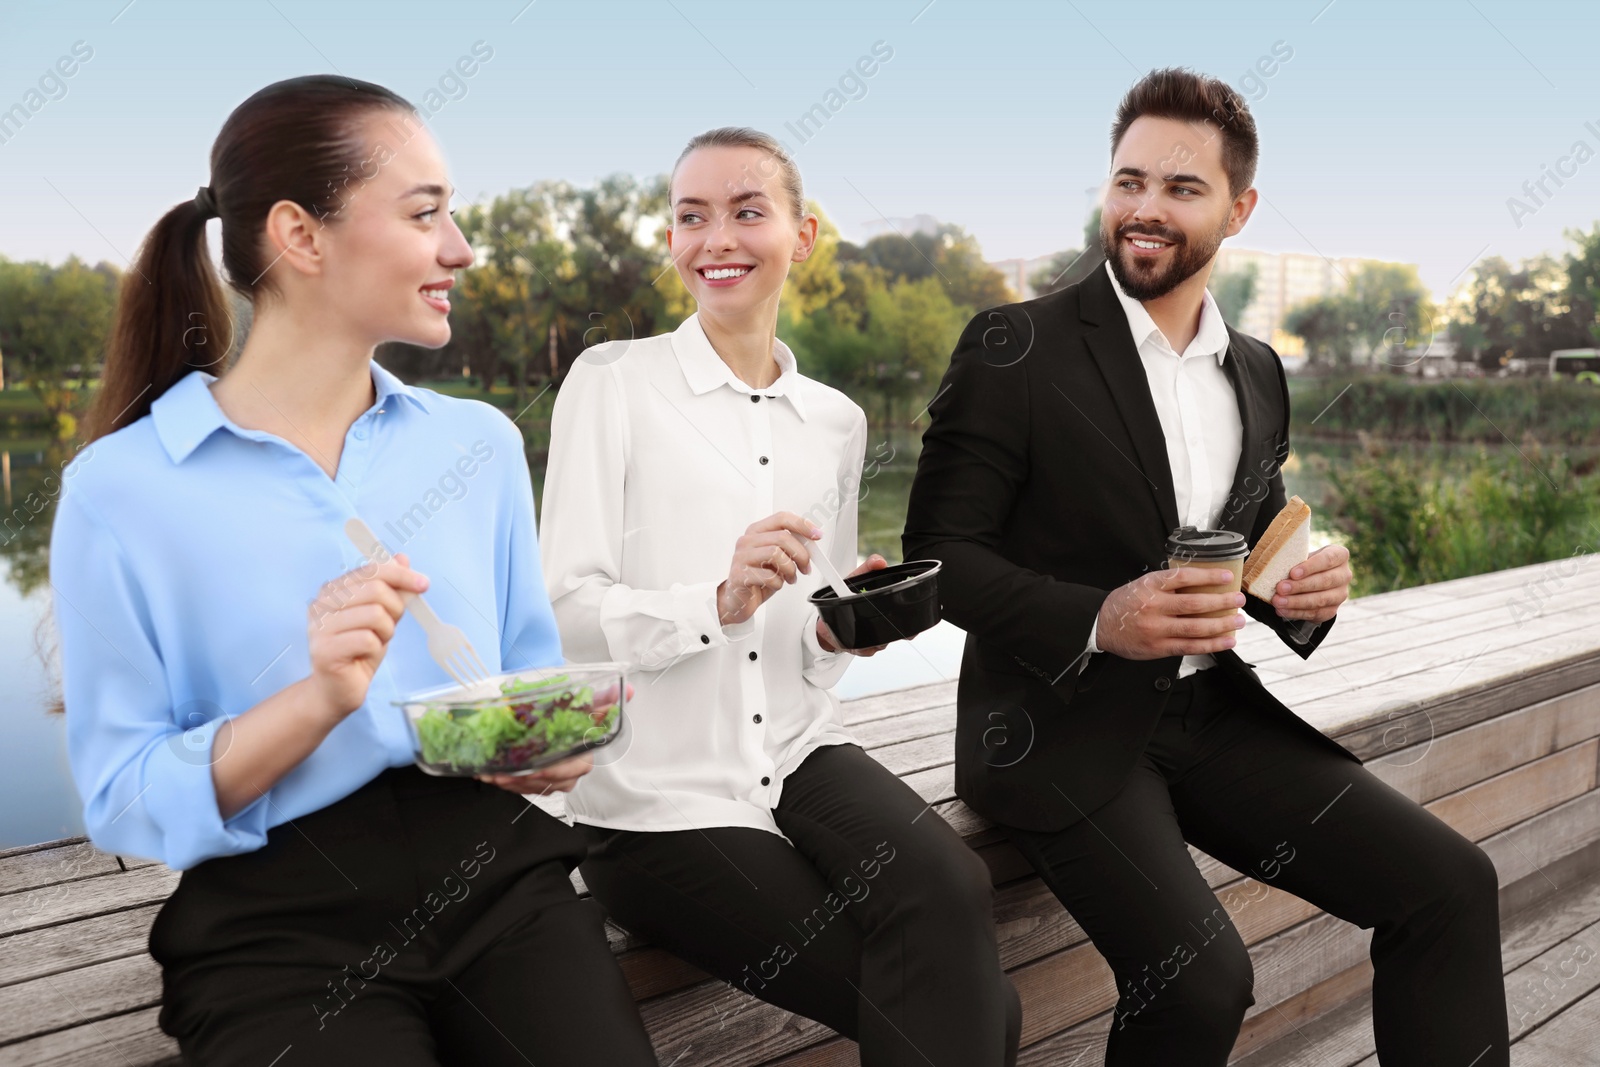 Photo of Business people spending time together during lunch outdoors